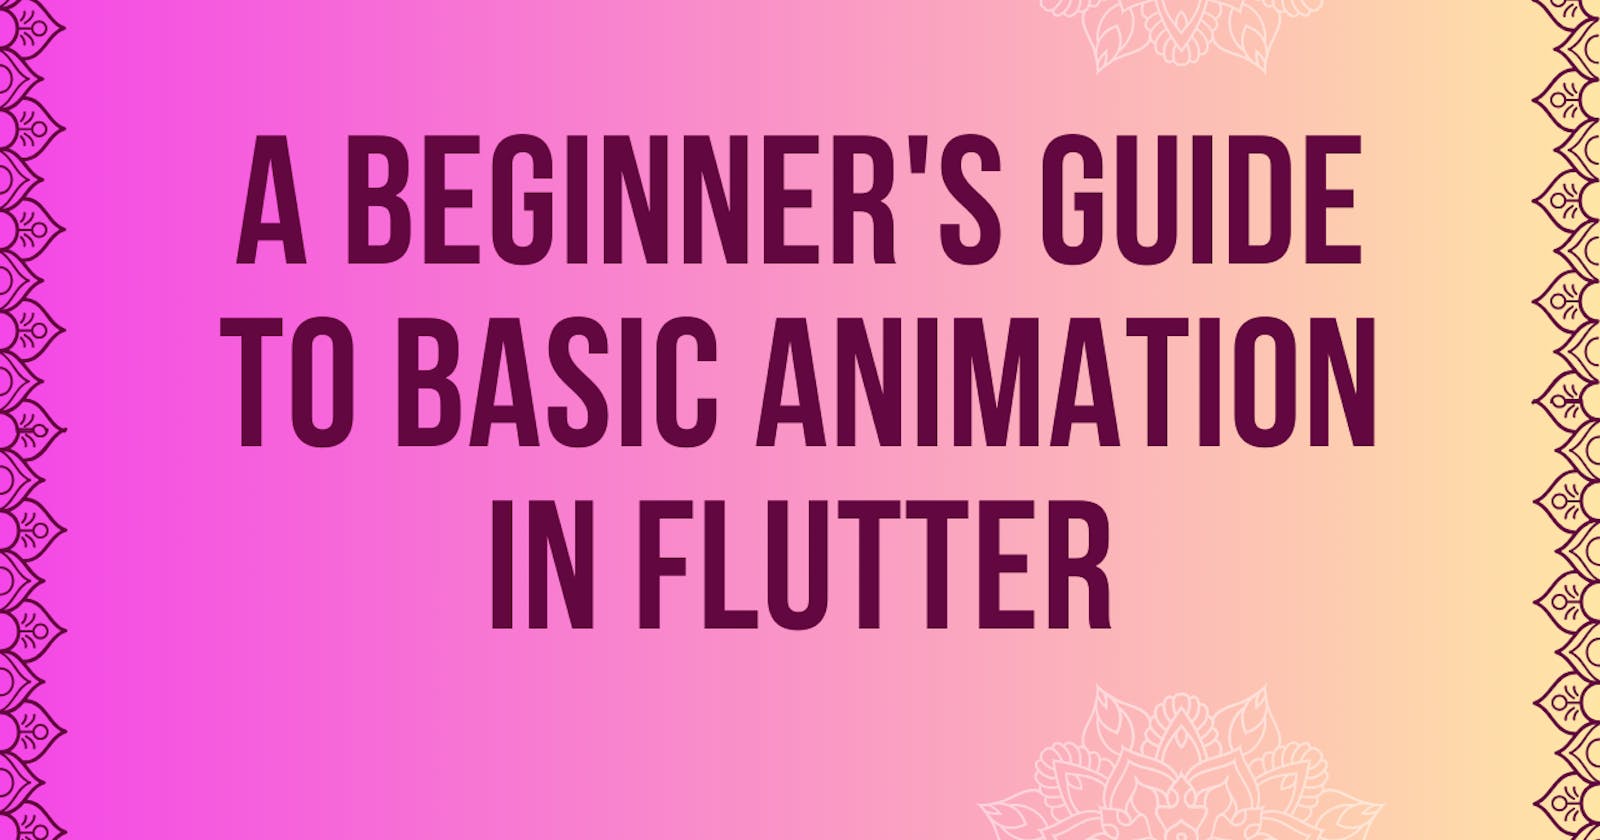 A Beginner's Guide to Basic Animation in Flutter